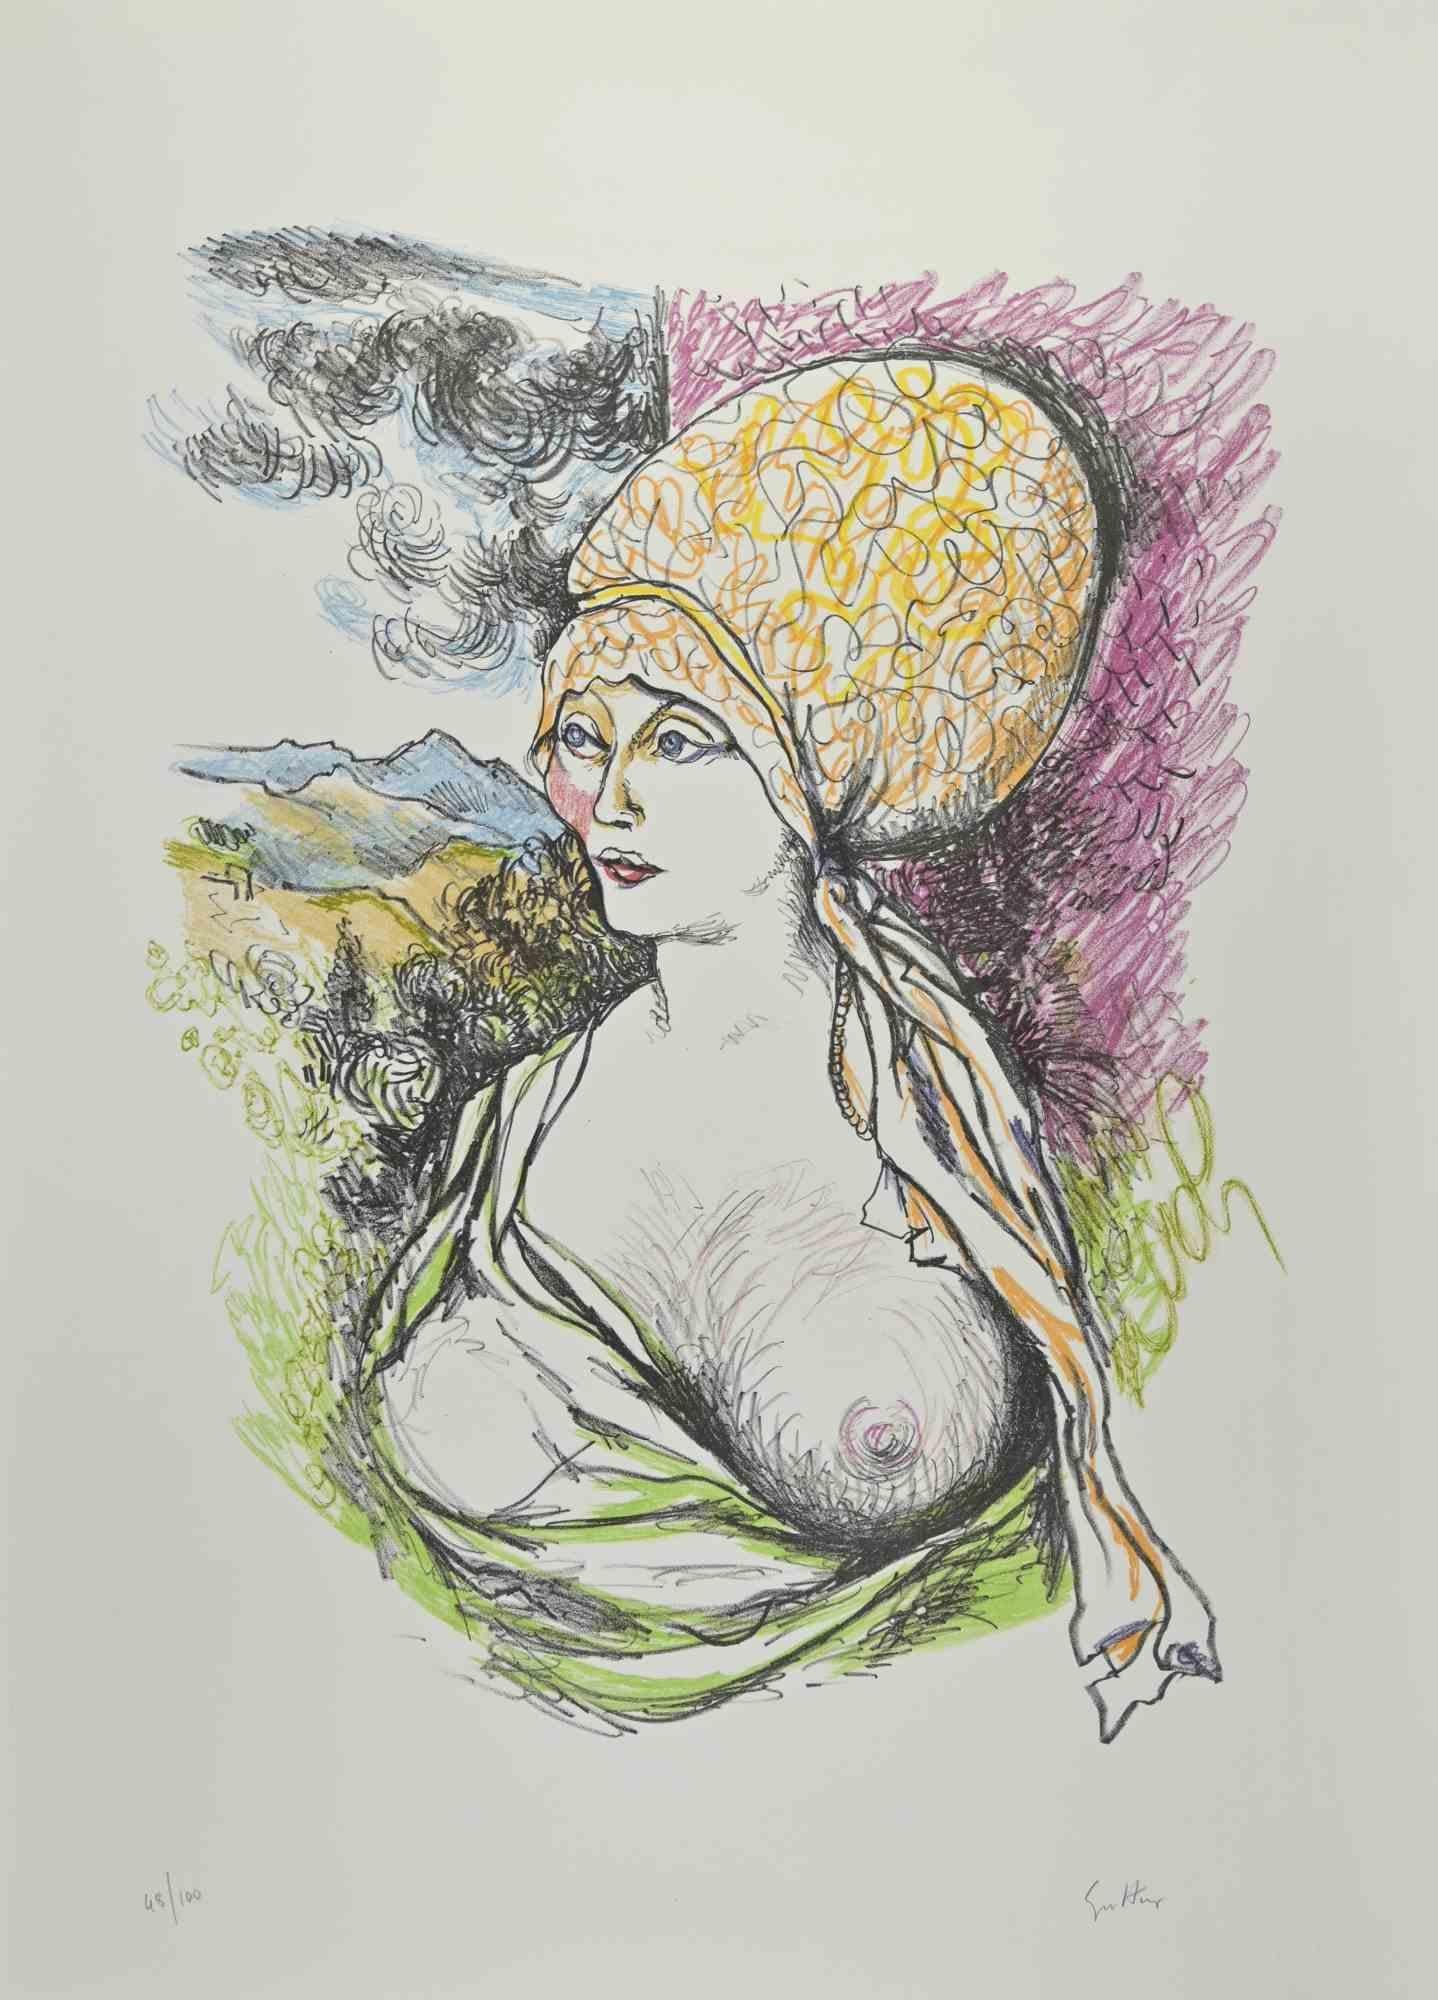 Hommage to Gustave Courbet is a lithograph realized by Renato Guttuso in 1980.

Hand-signed on the lower.

Numbered, edition of 100.

Drystamp "La Spirale".